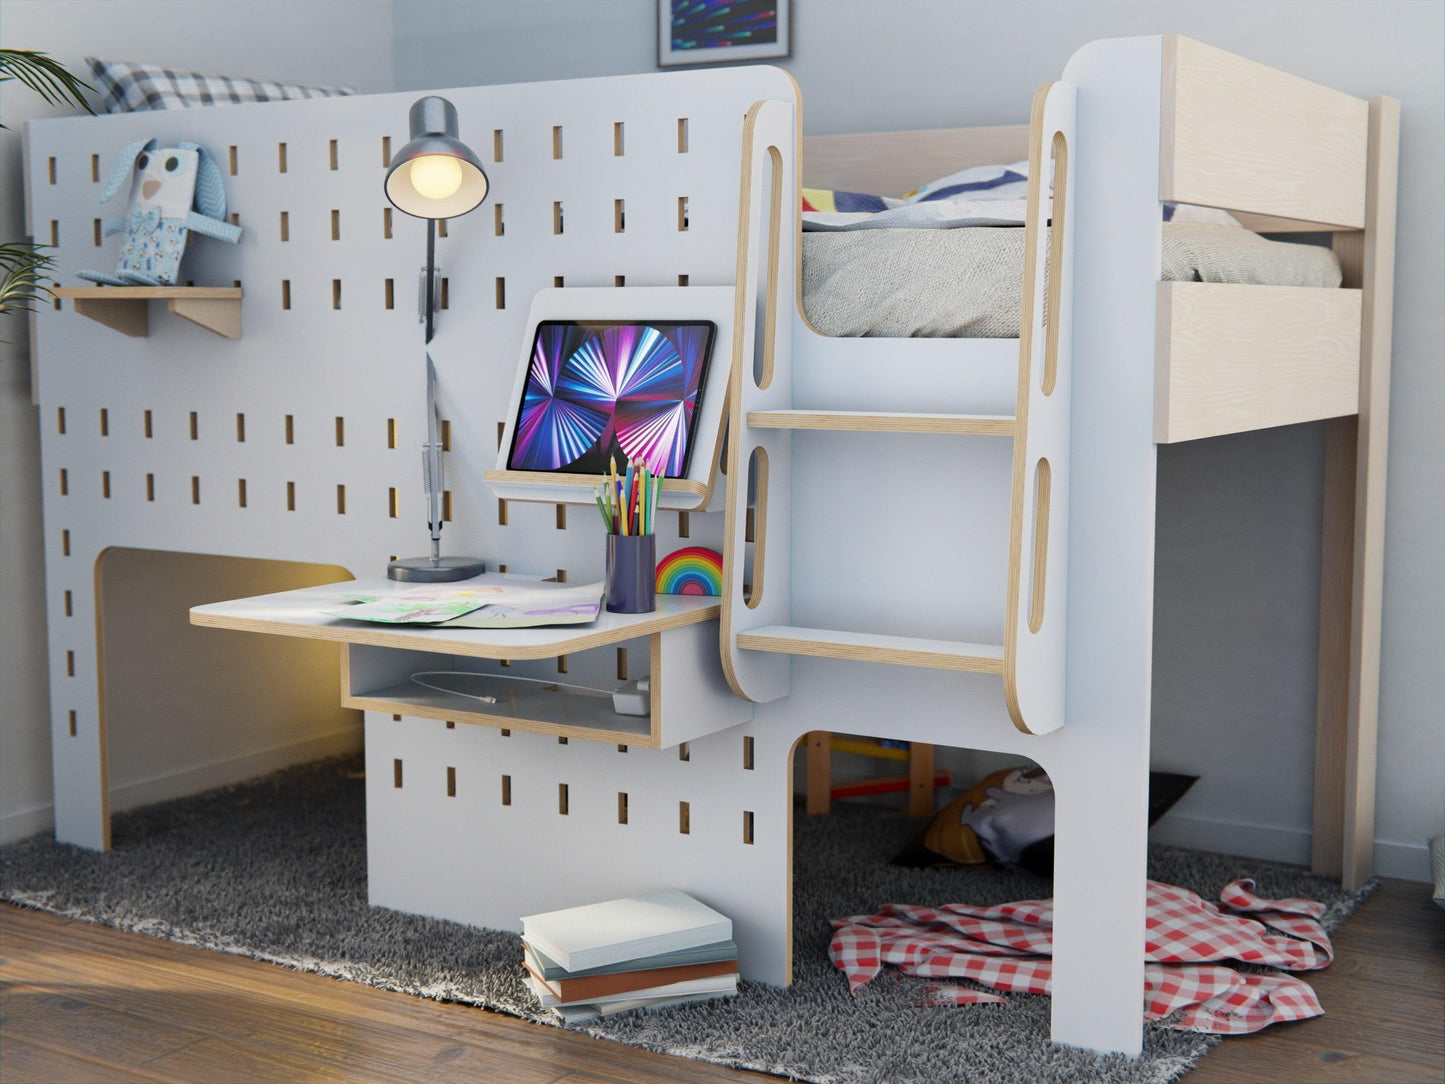 Step into a world where practicality meets childhood fun - our wooden low loft bed with an attached study desk is a perfect fit for your kid's room.